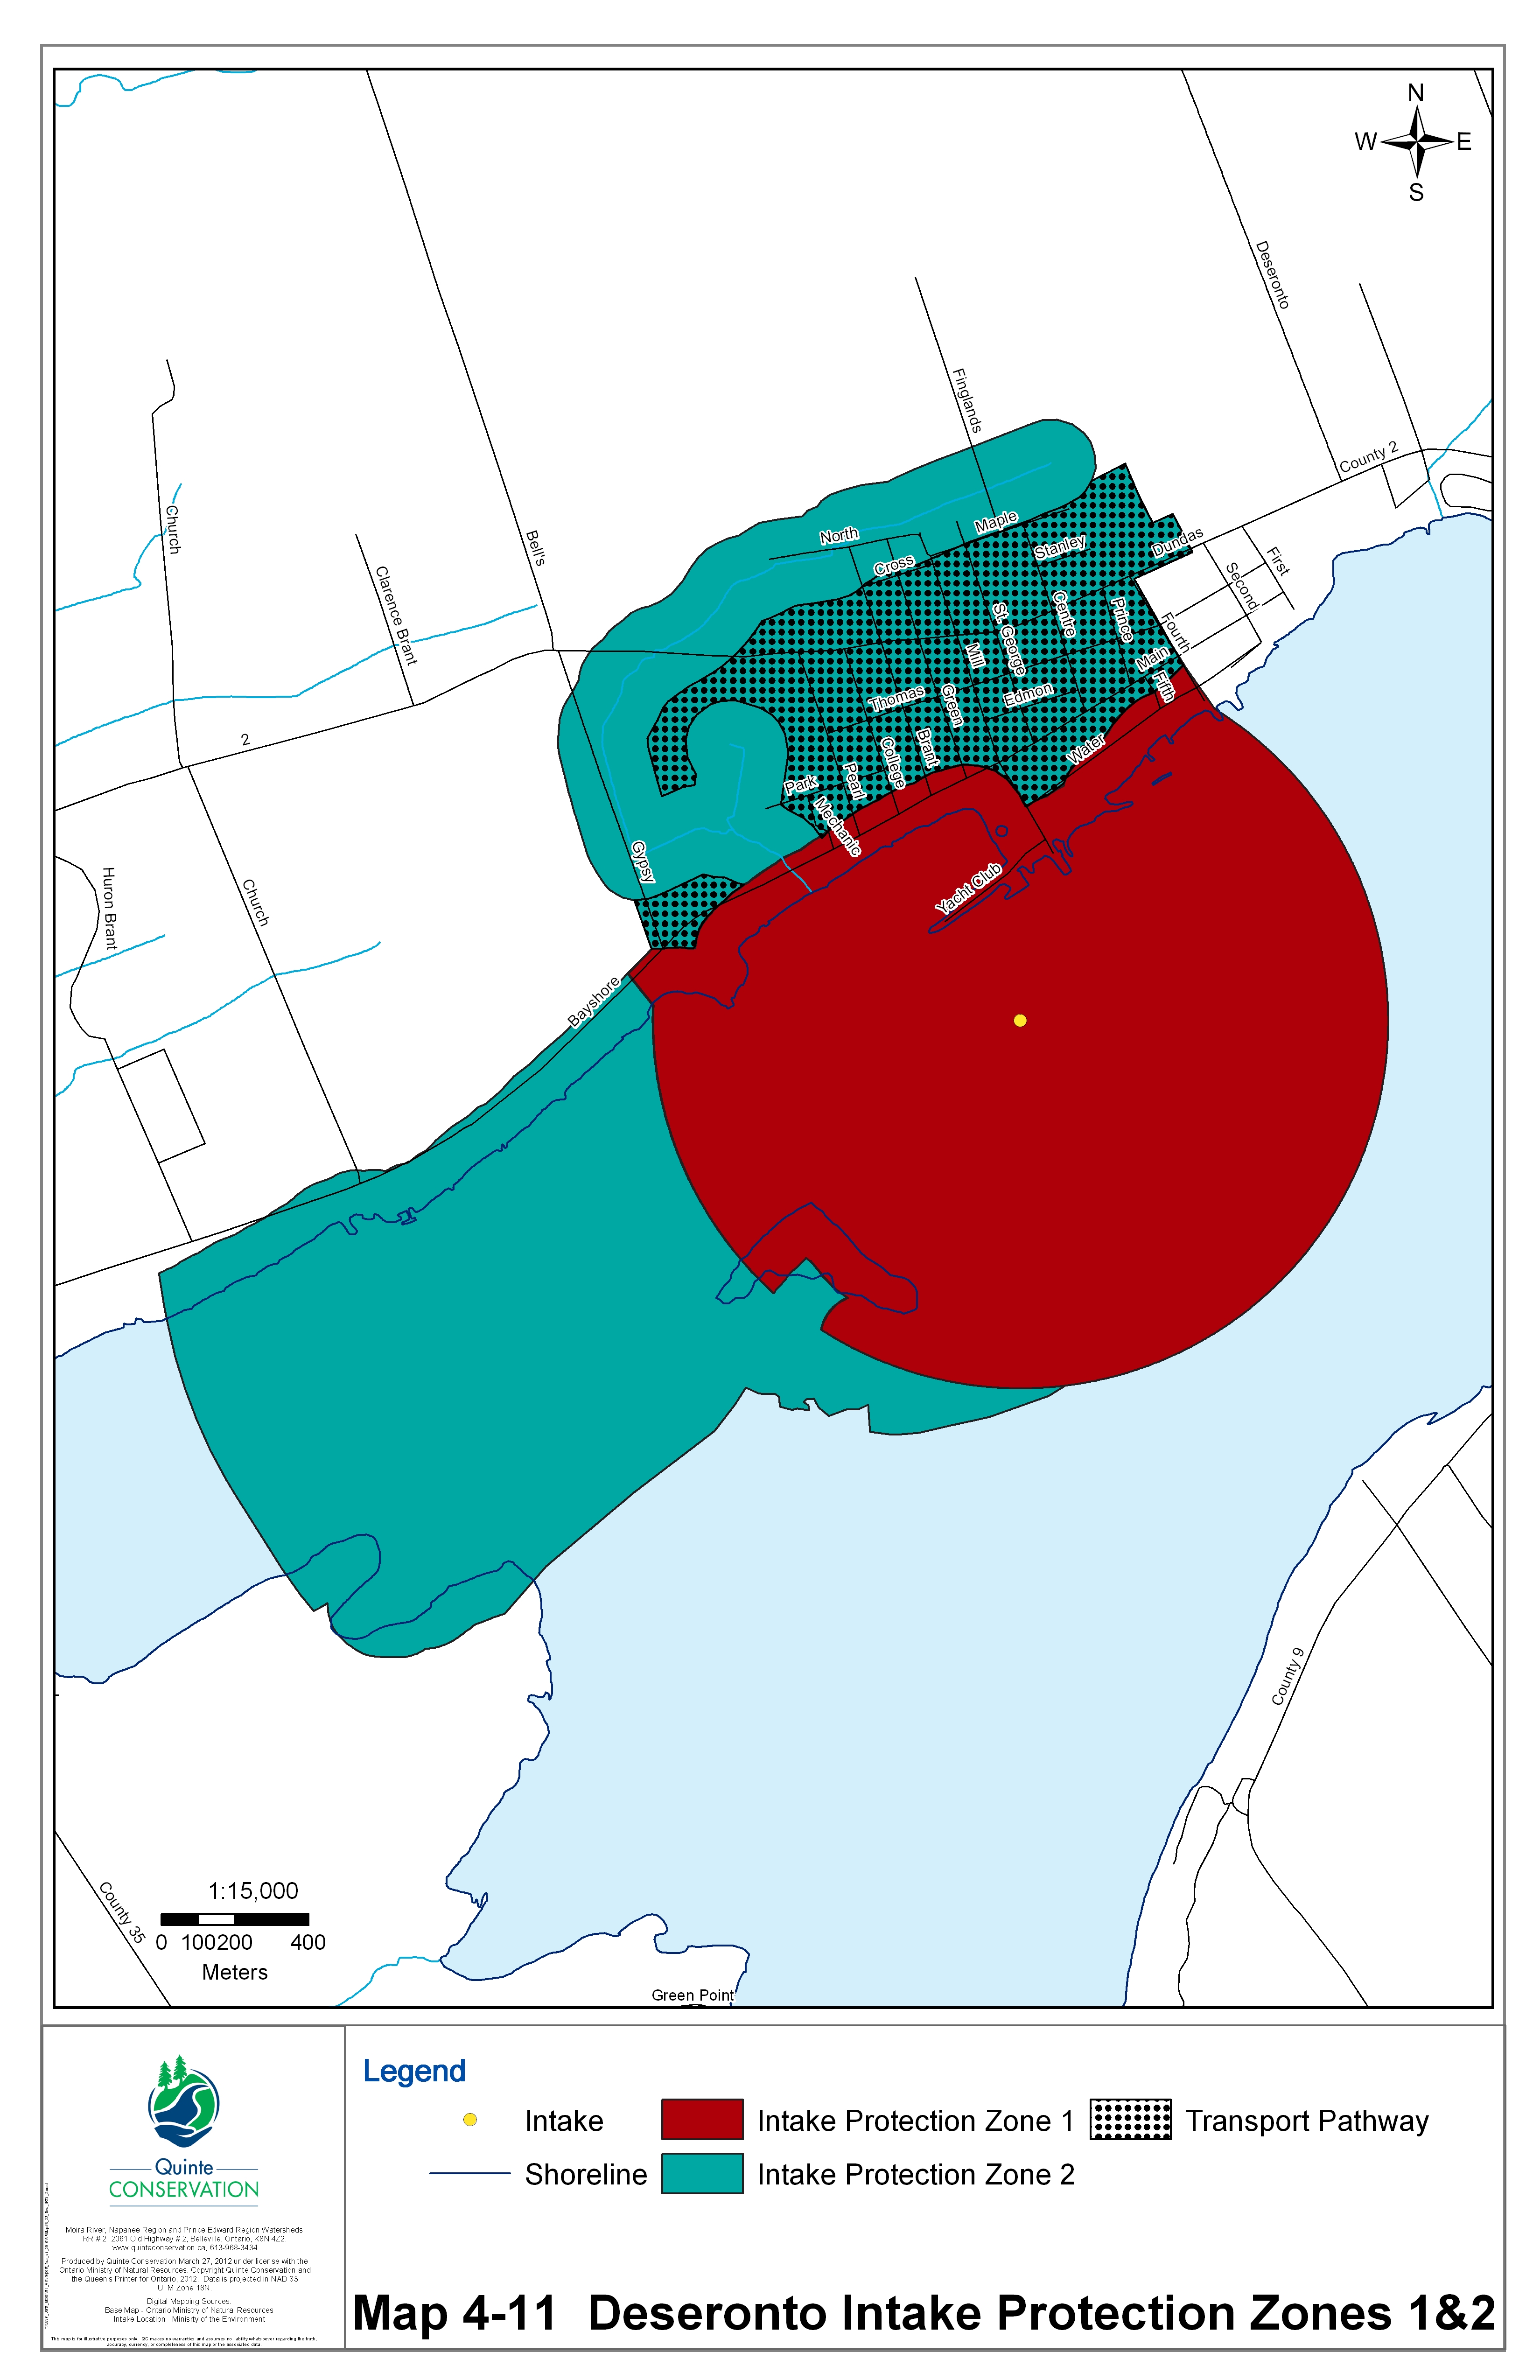 Drinking water systems map for Deseronto